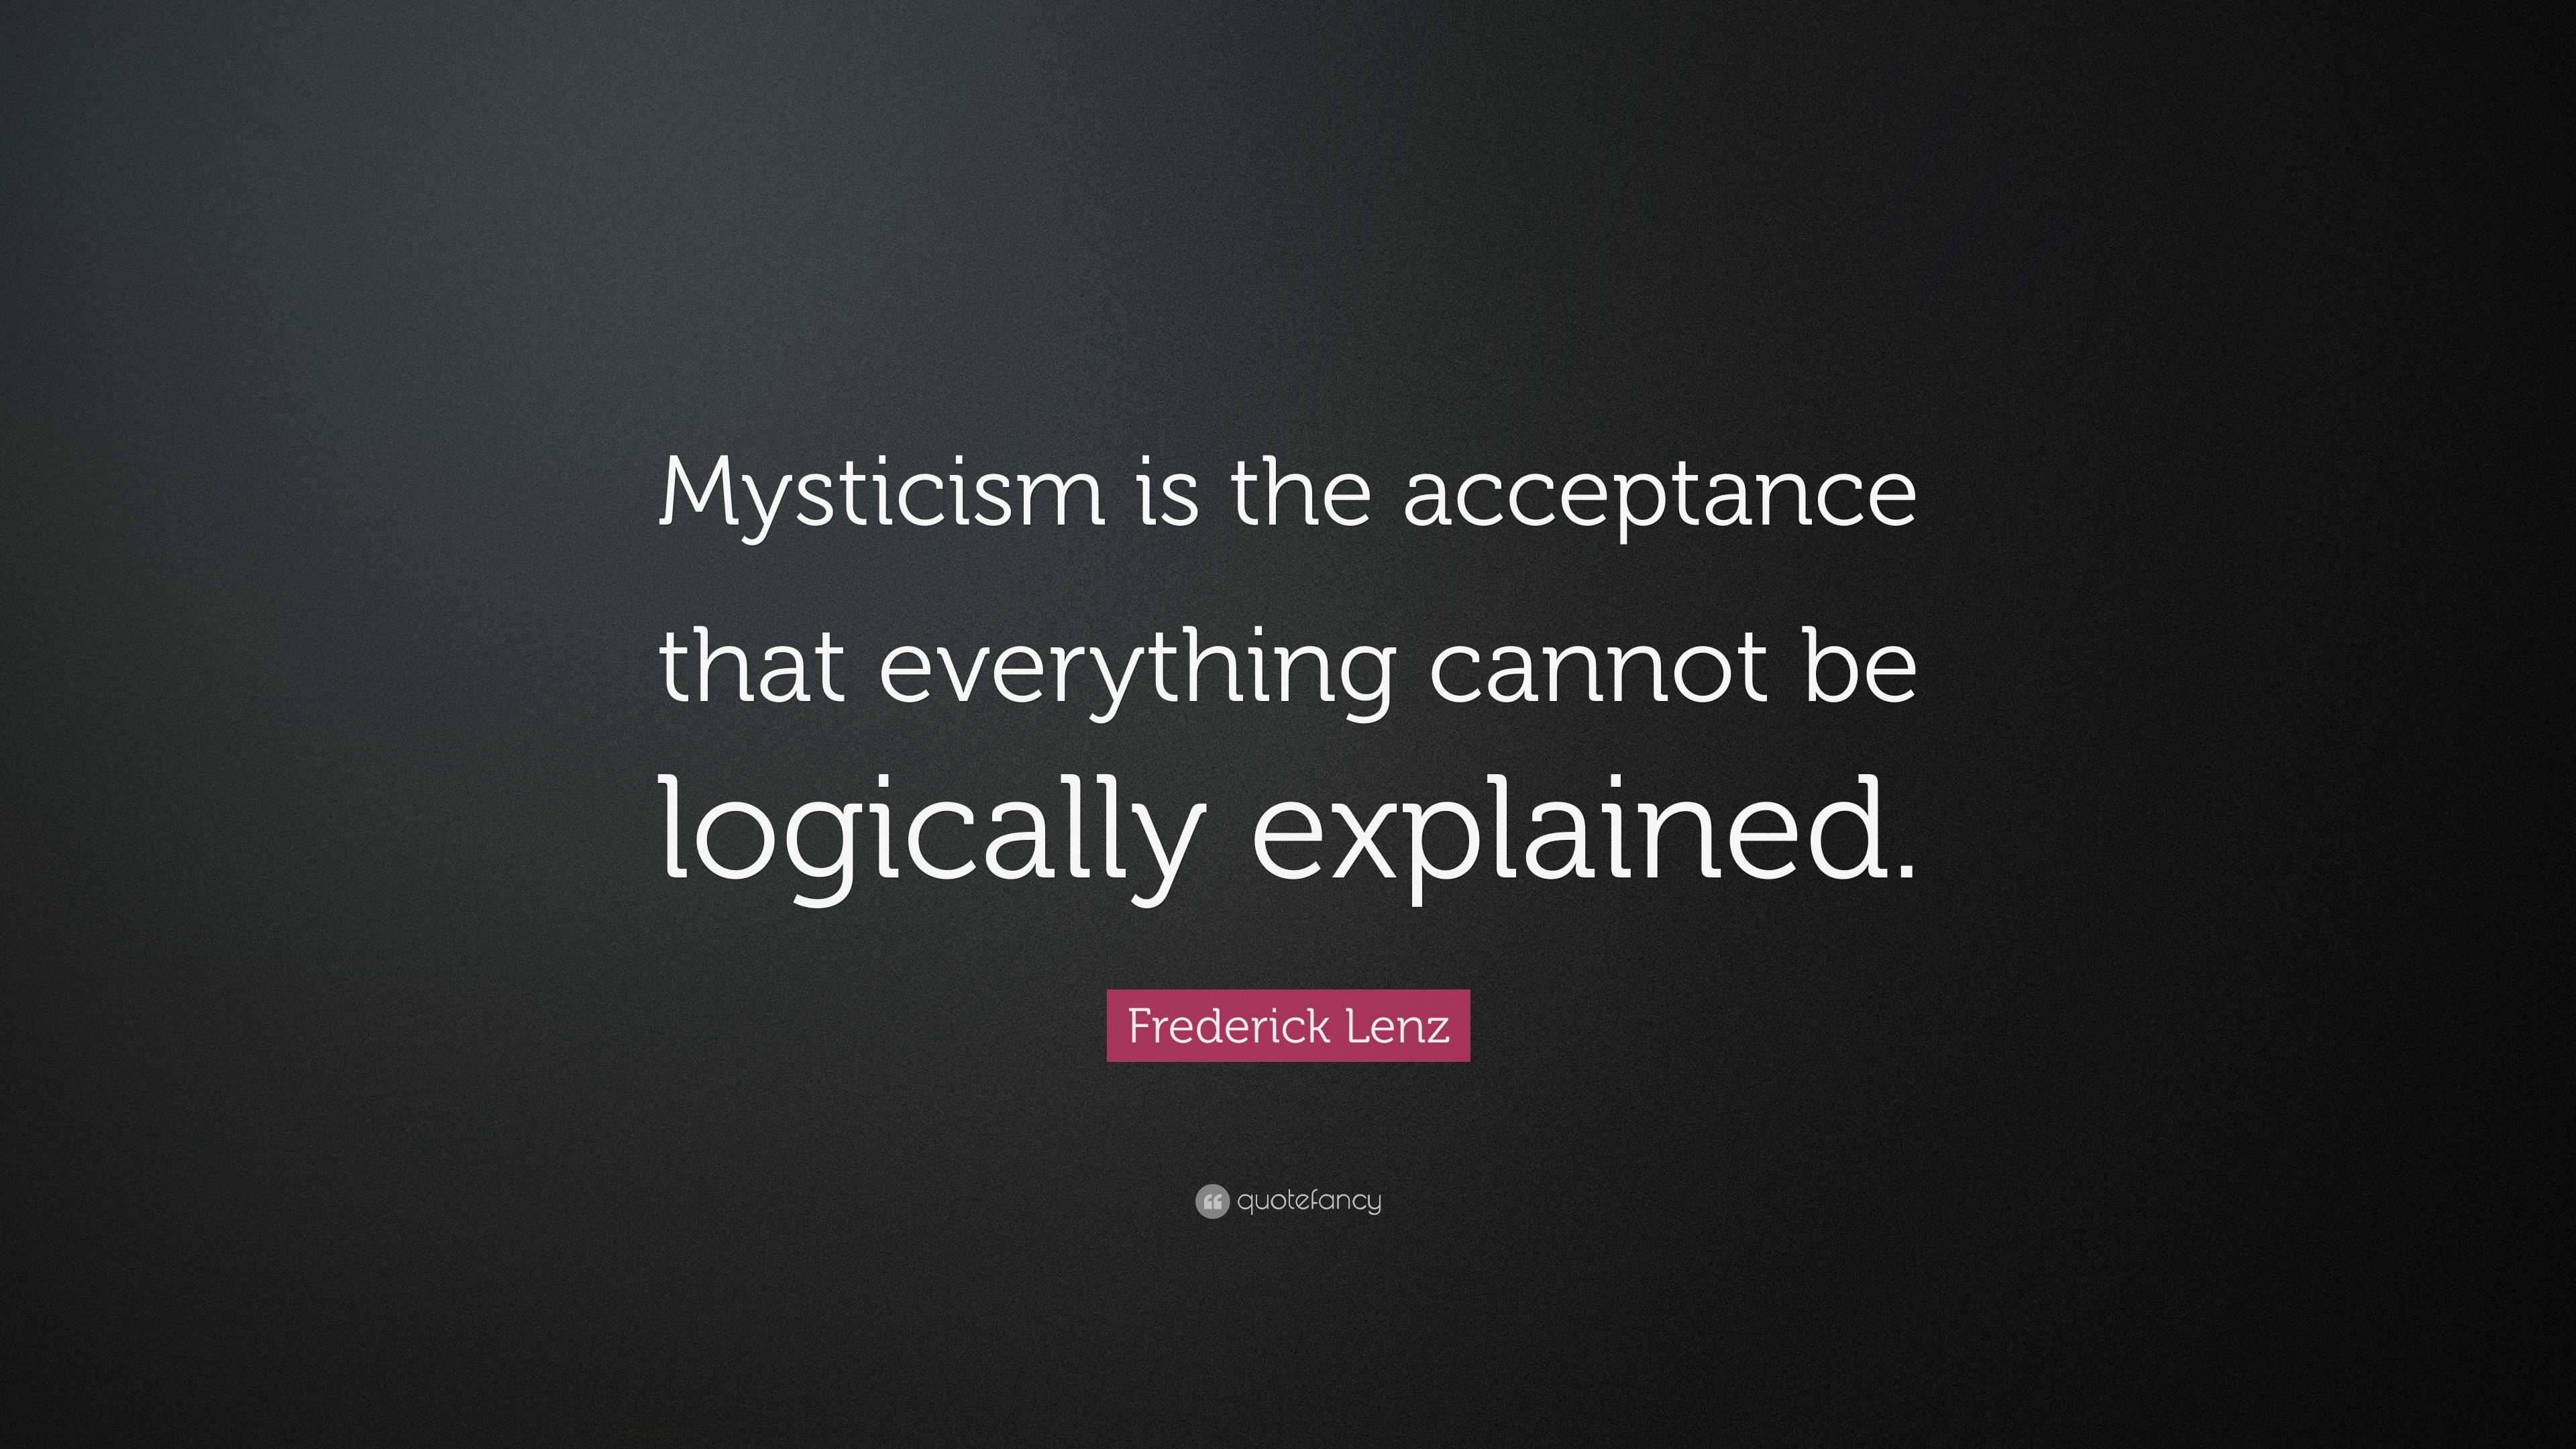 Frederick Lenz Quote: “Mysticism is the acceptance that everything ...